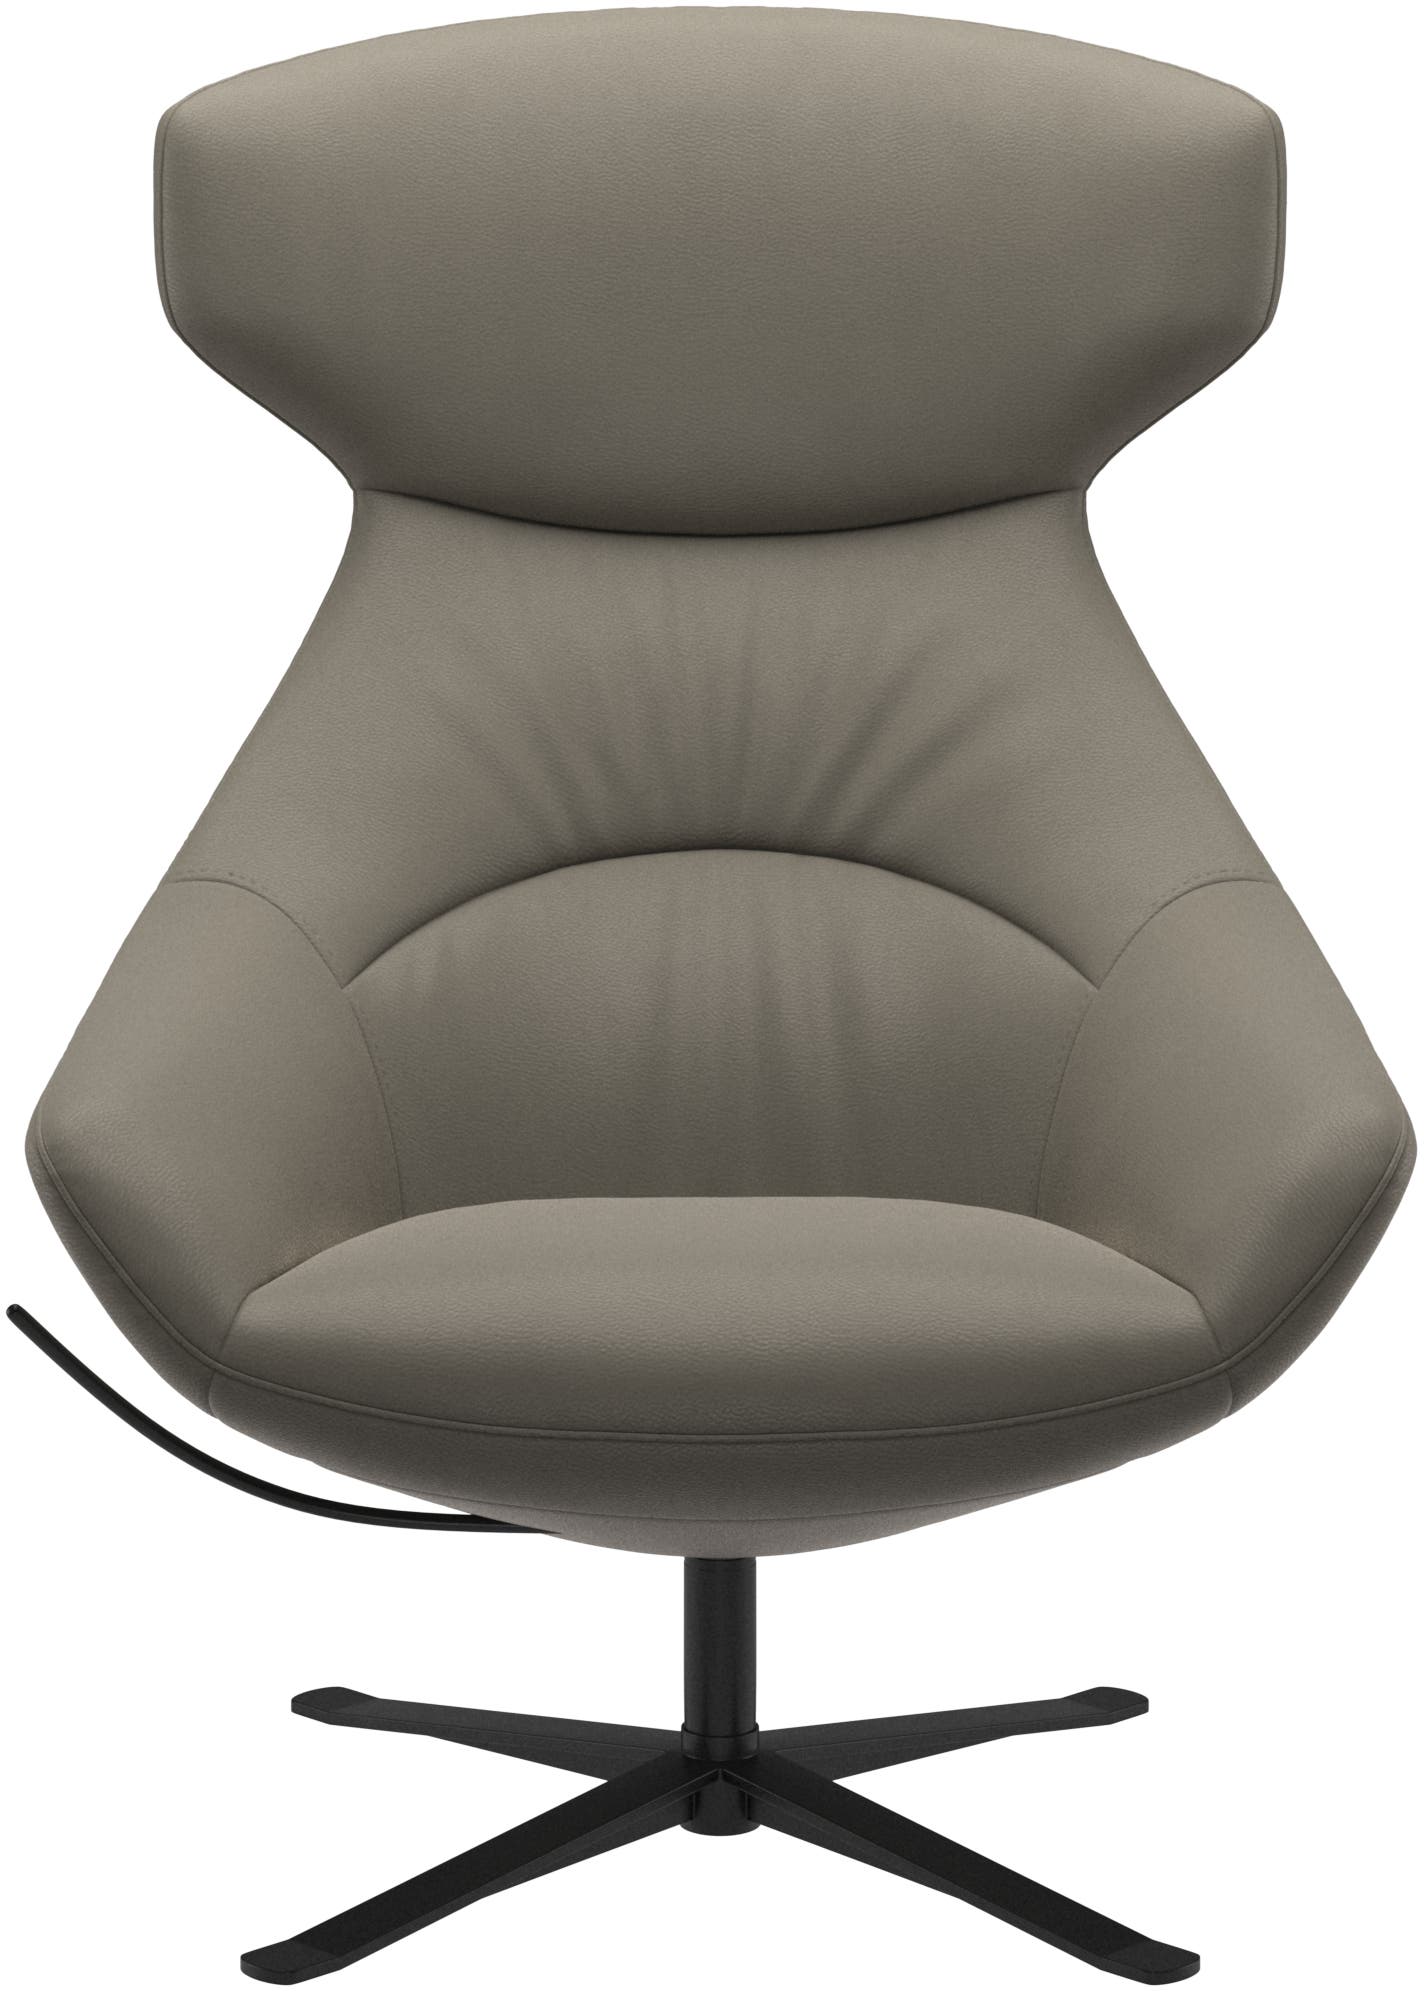 Porto chair with reclining back function and swivel base